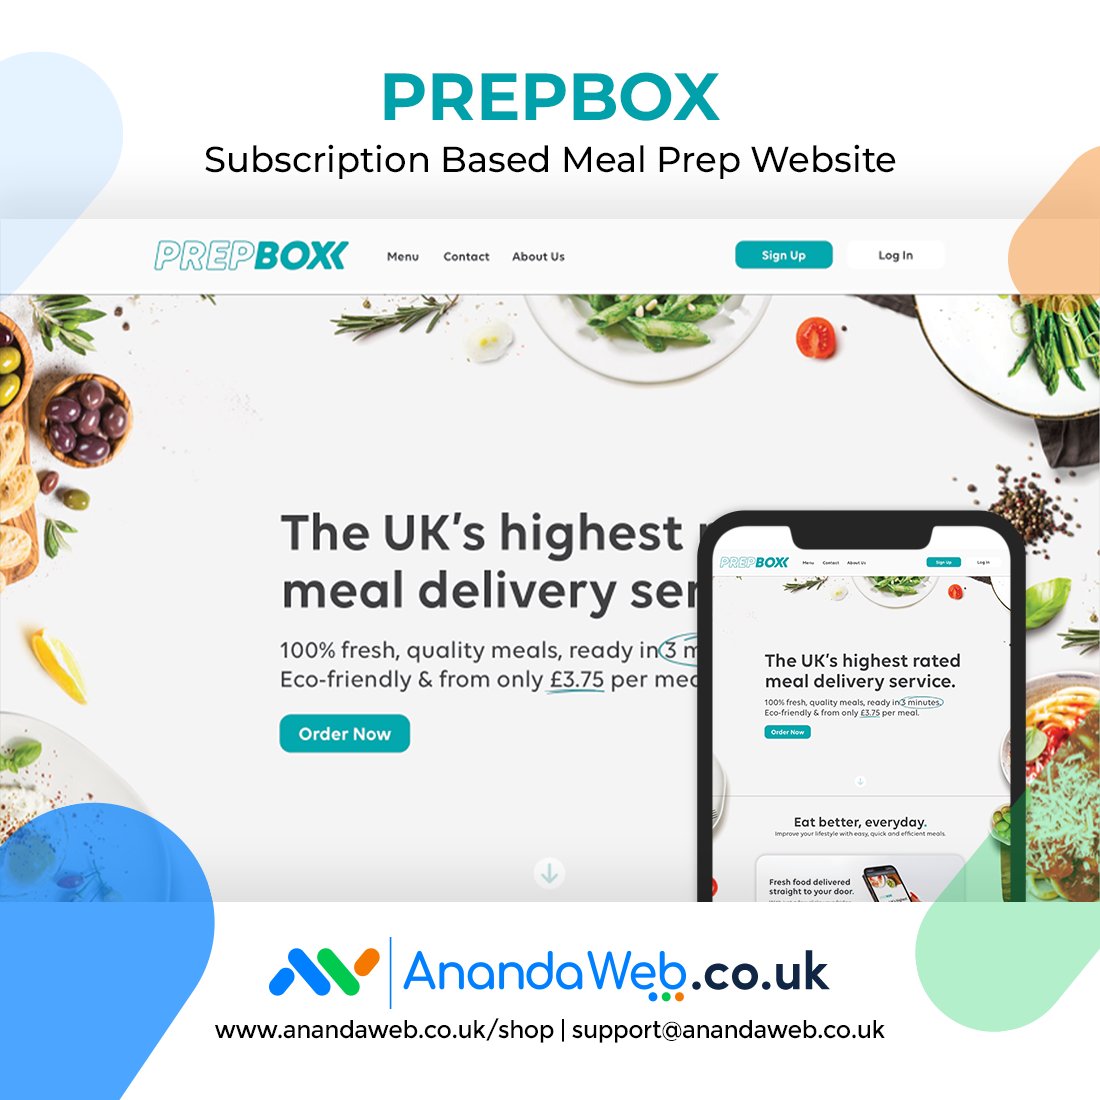 The website was built using WordPress and WooCommerce. 💻 The design is sleek and modern, with the wow factor in mind. 
 #MealService #SubscriptionBox #KentFoodies  #Subscriptionbasedwebsite
#WooCommercewebsite #WebDesignKent #KentStartup #MaidstoneBusiness
#webdesignmaidstone